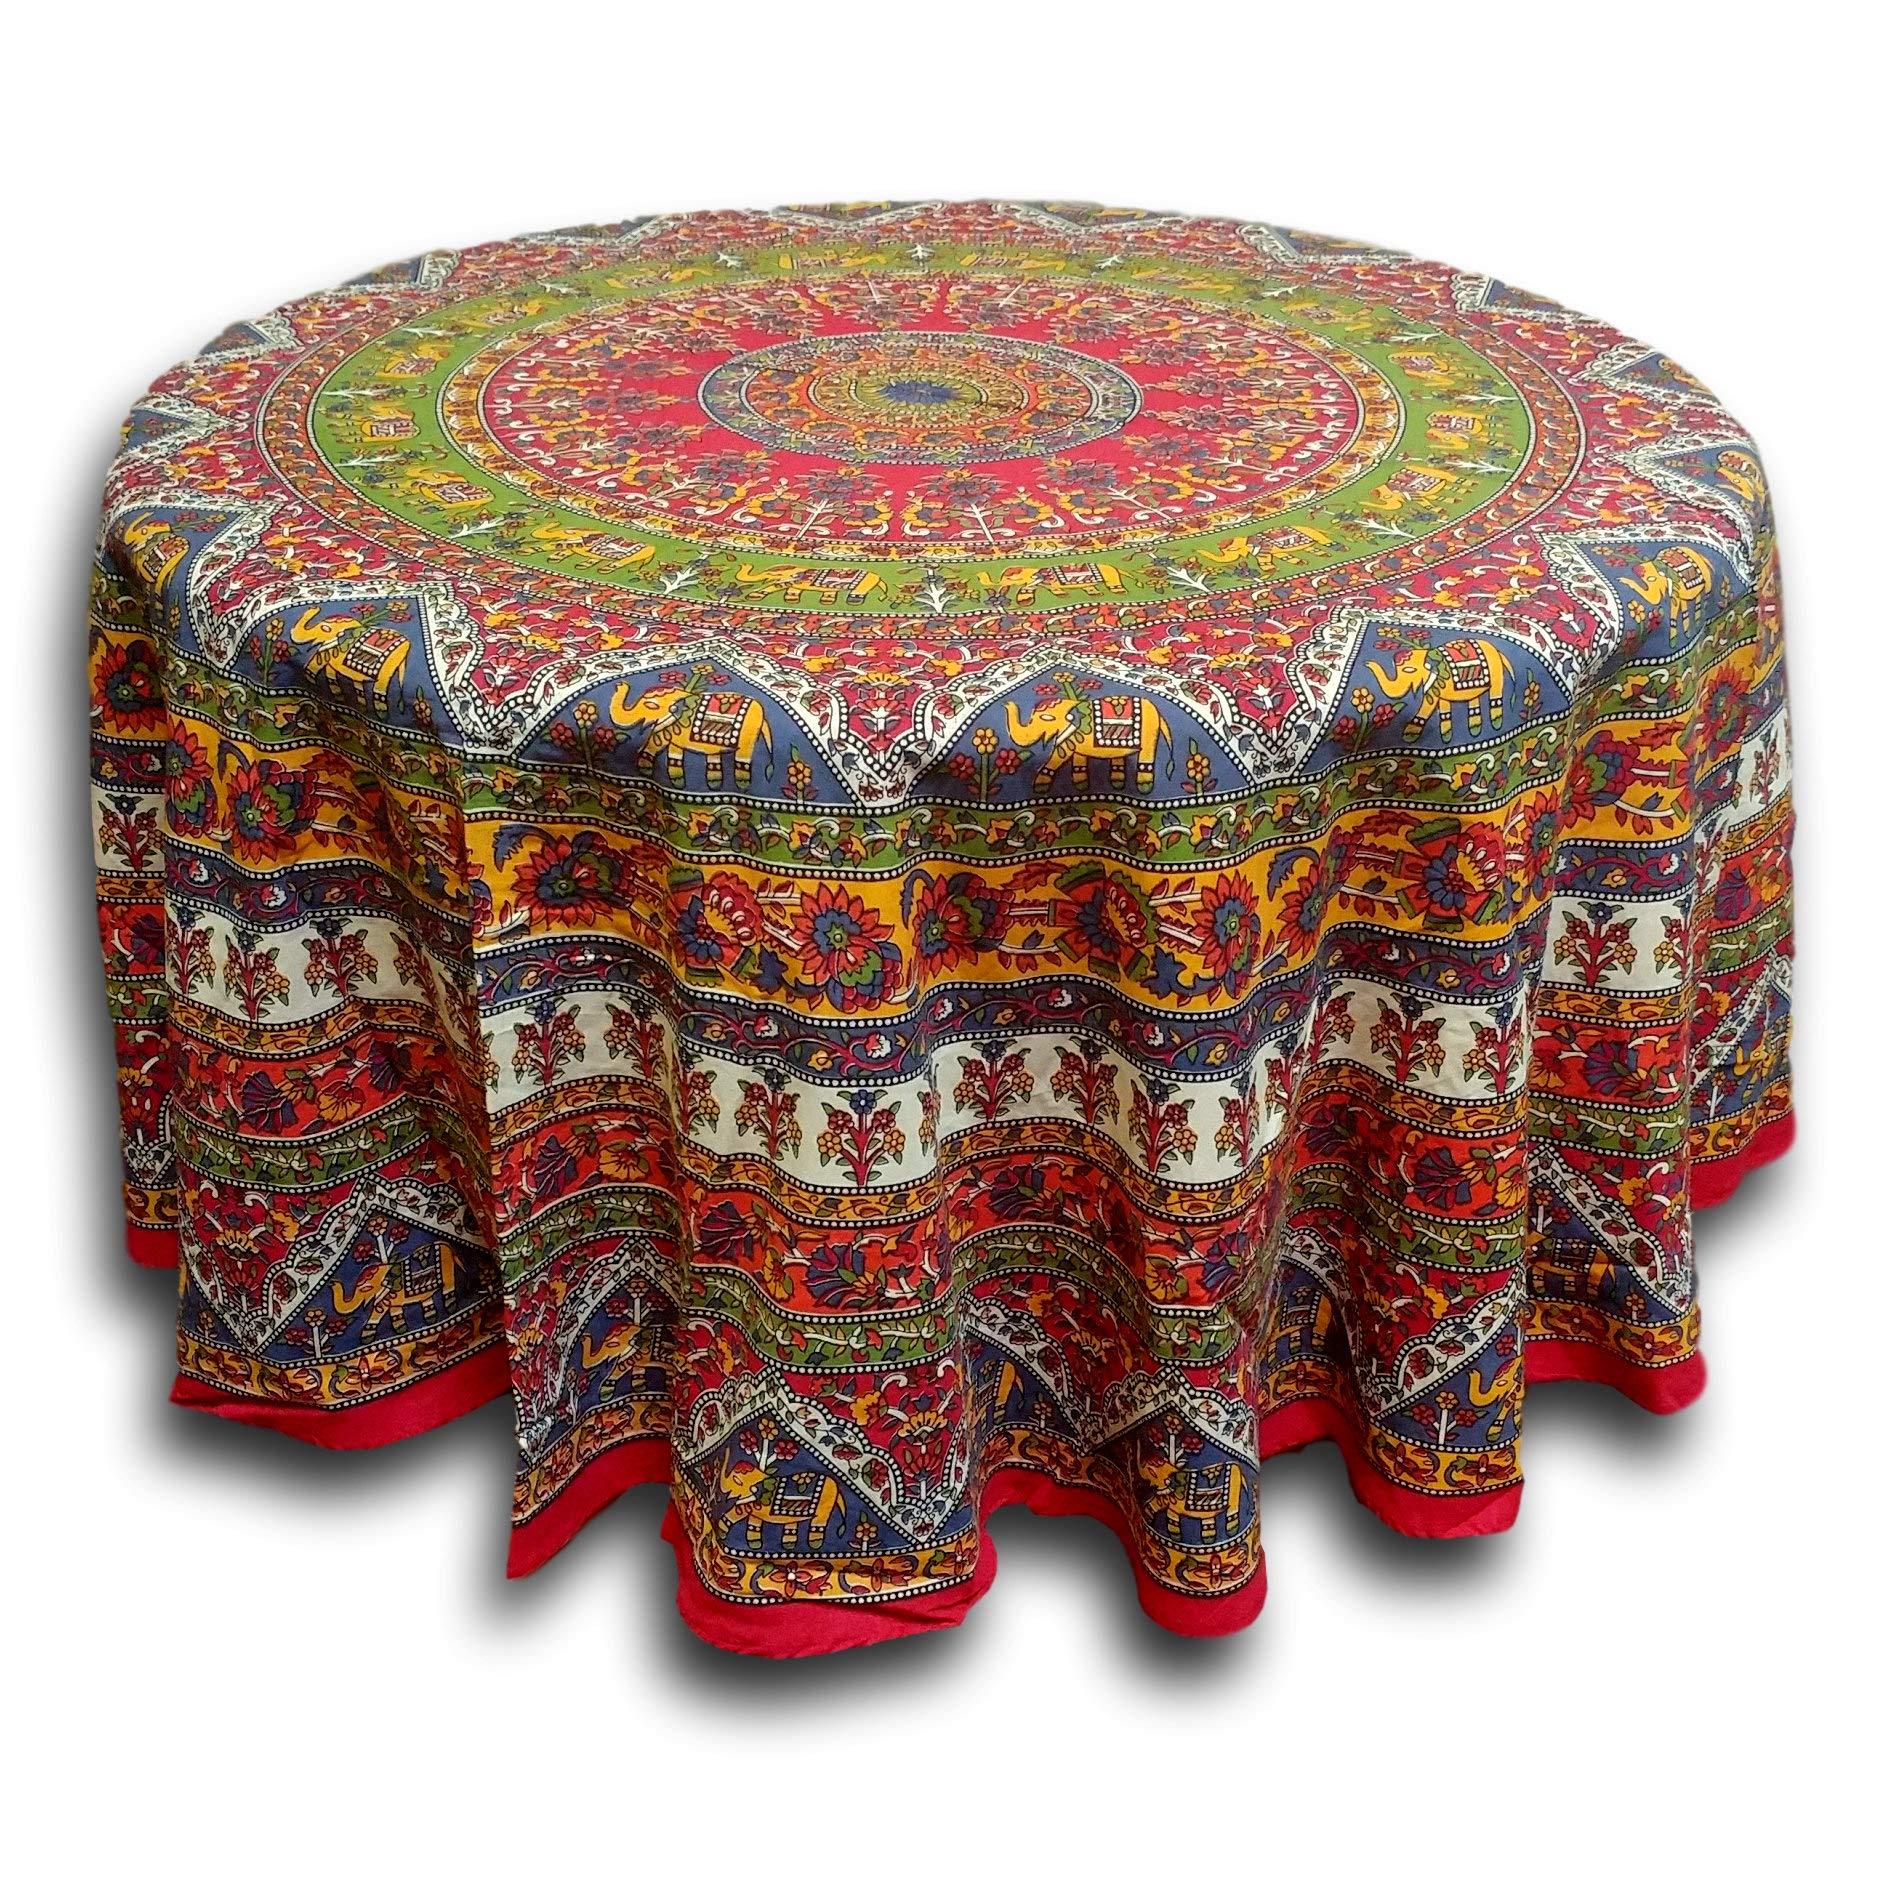 India Arts Elephant Mandala Floral Print Red Tablecloth Round for Dining and Kitchen Cotton Table Linen Red Green Blue